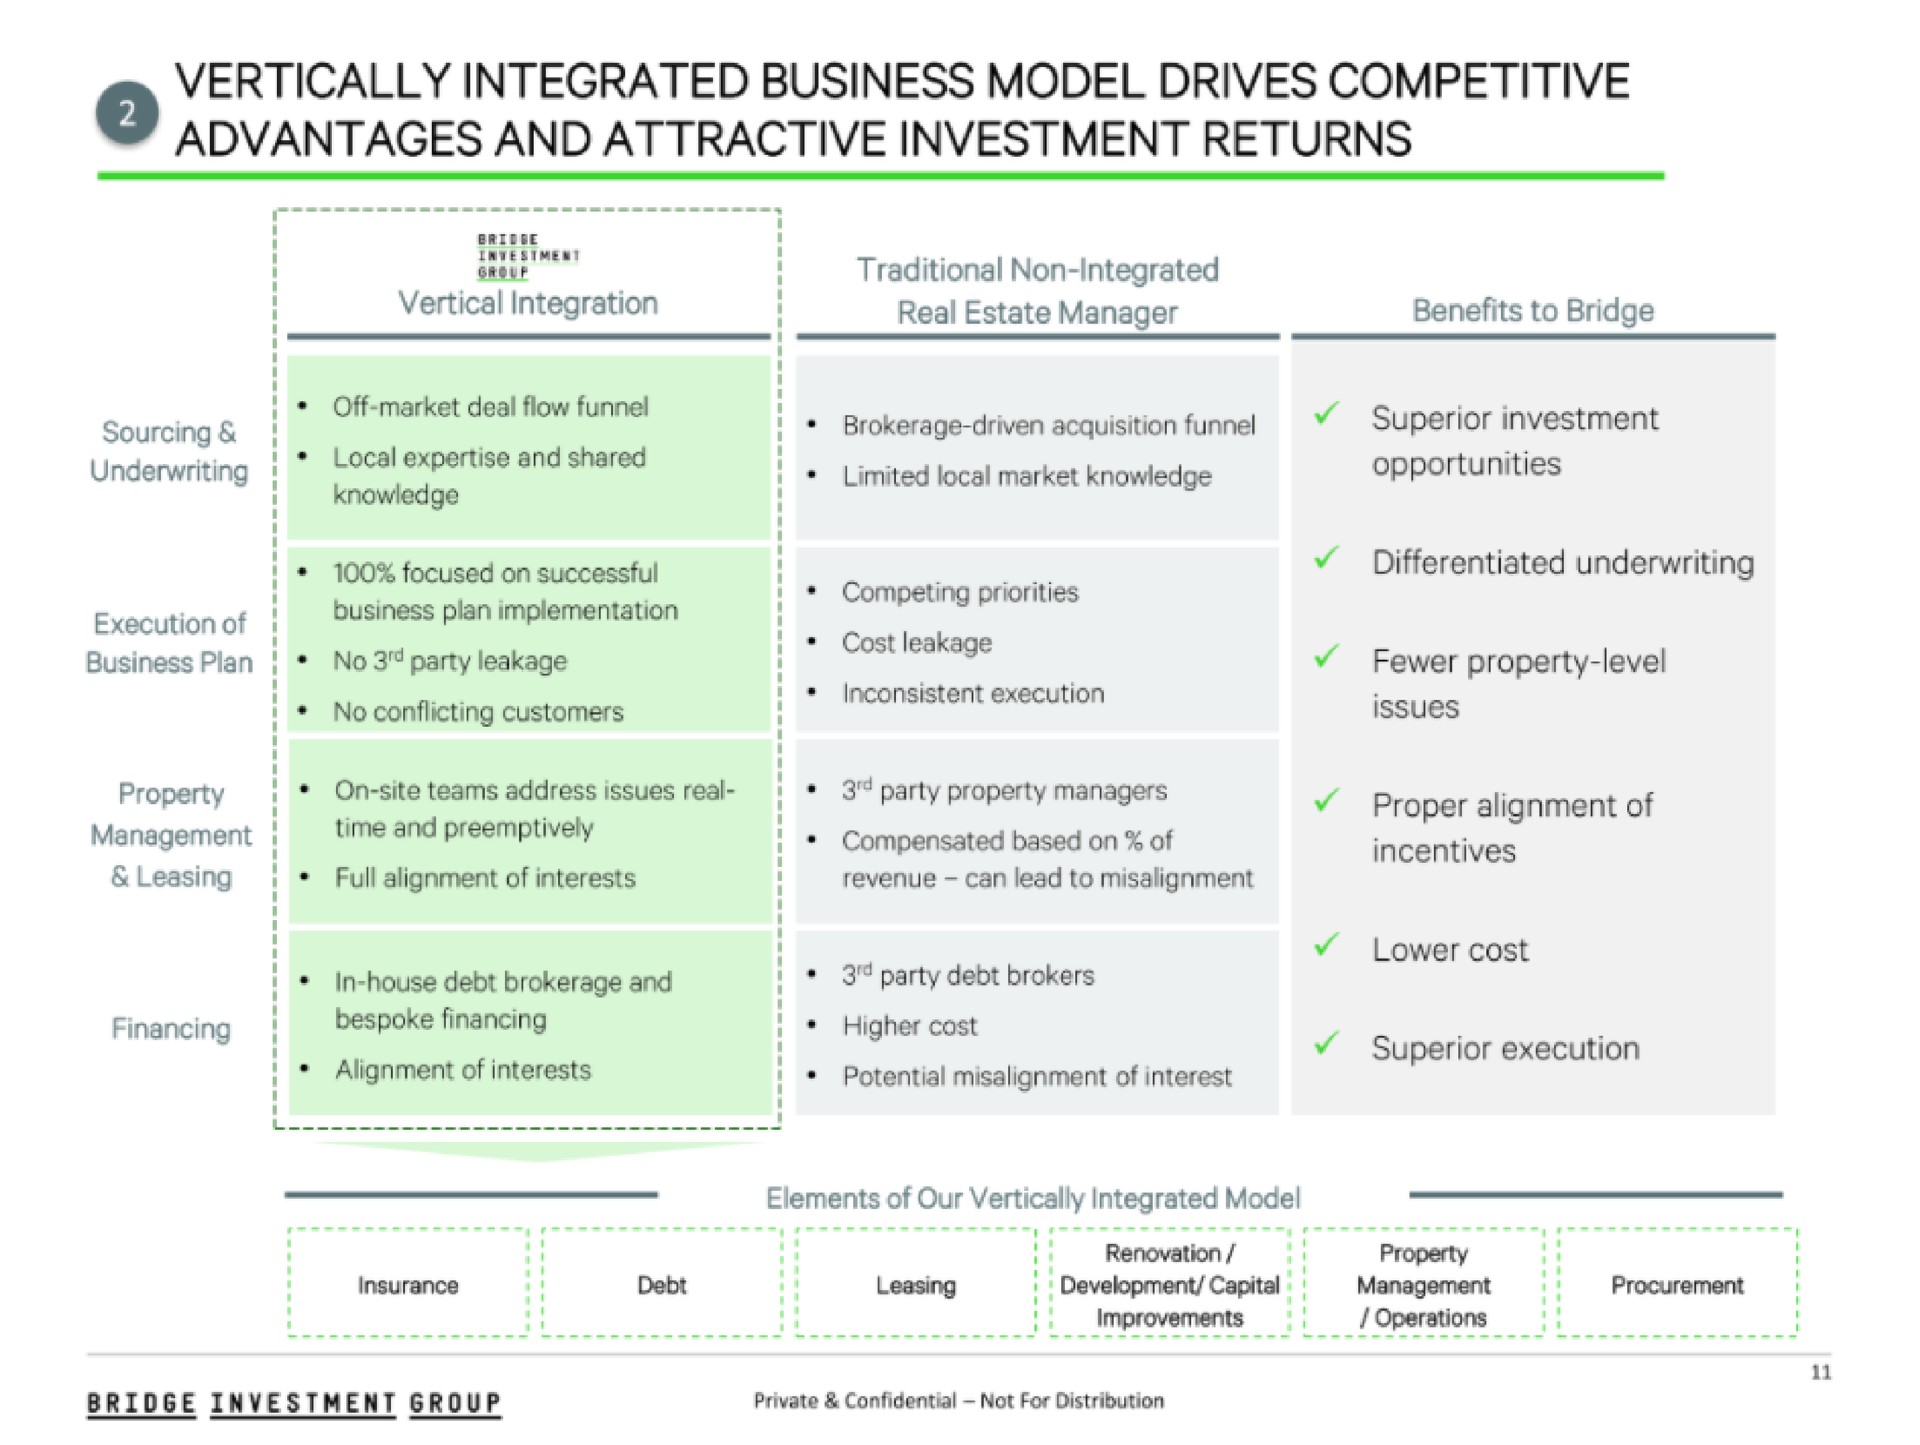 vertically integrated business model drives competitive advantages and attractive investment returns | Bridge Investment Group